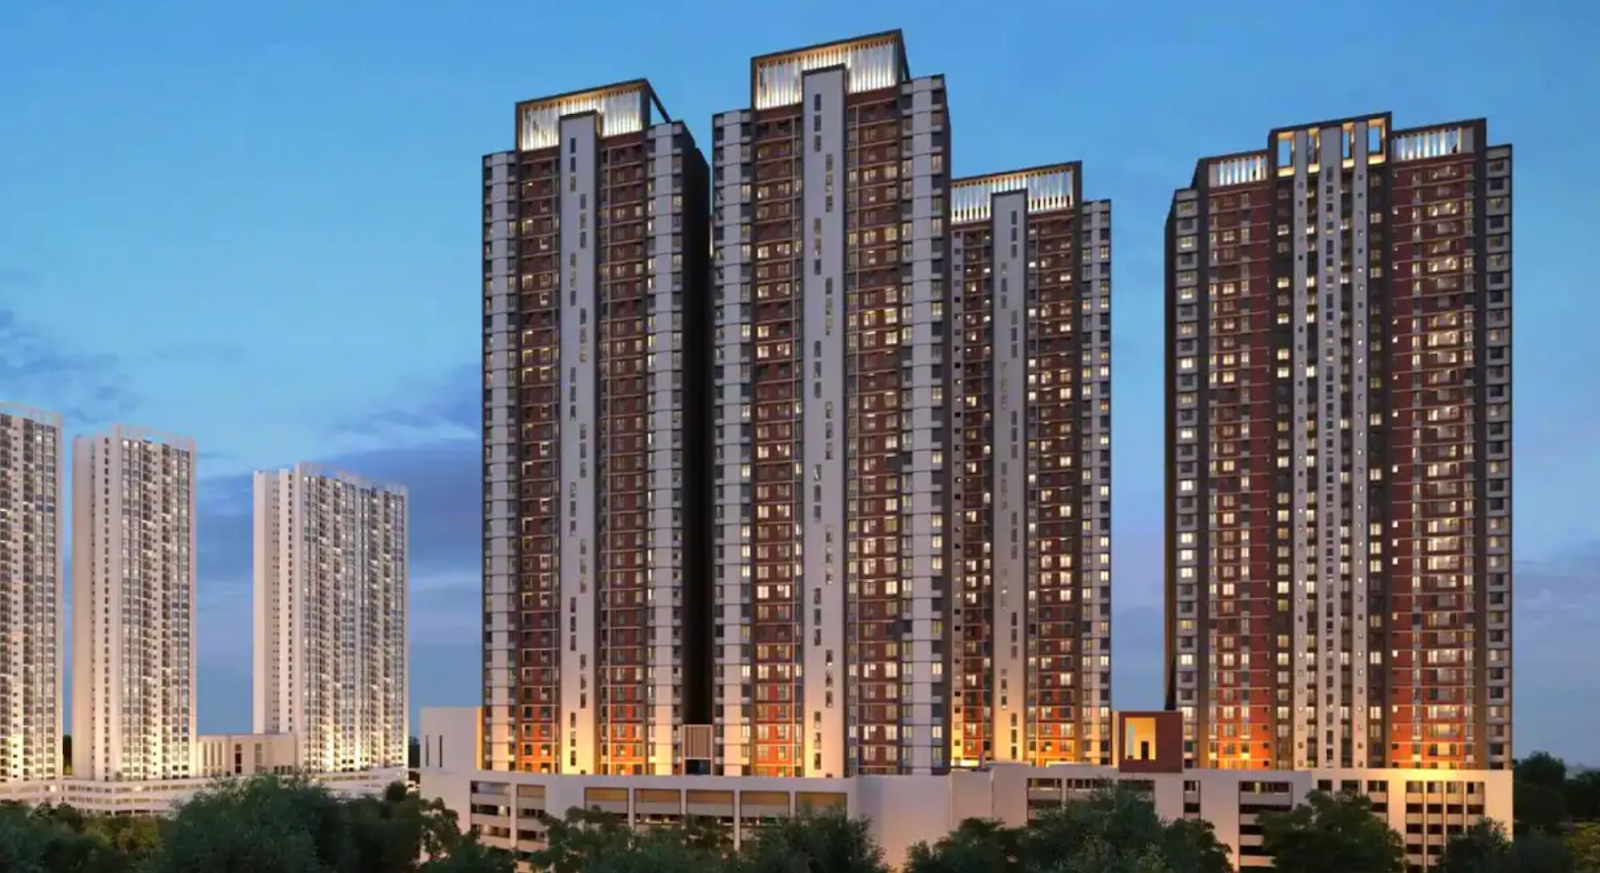 Godrej developers present the Bengal lamps properties as another step towards luxury.